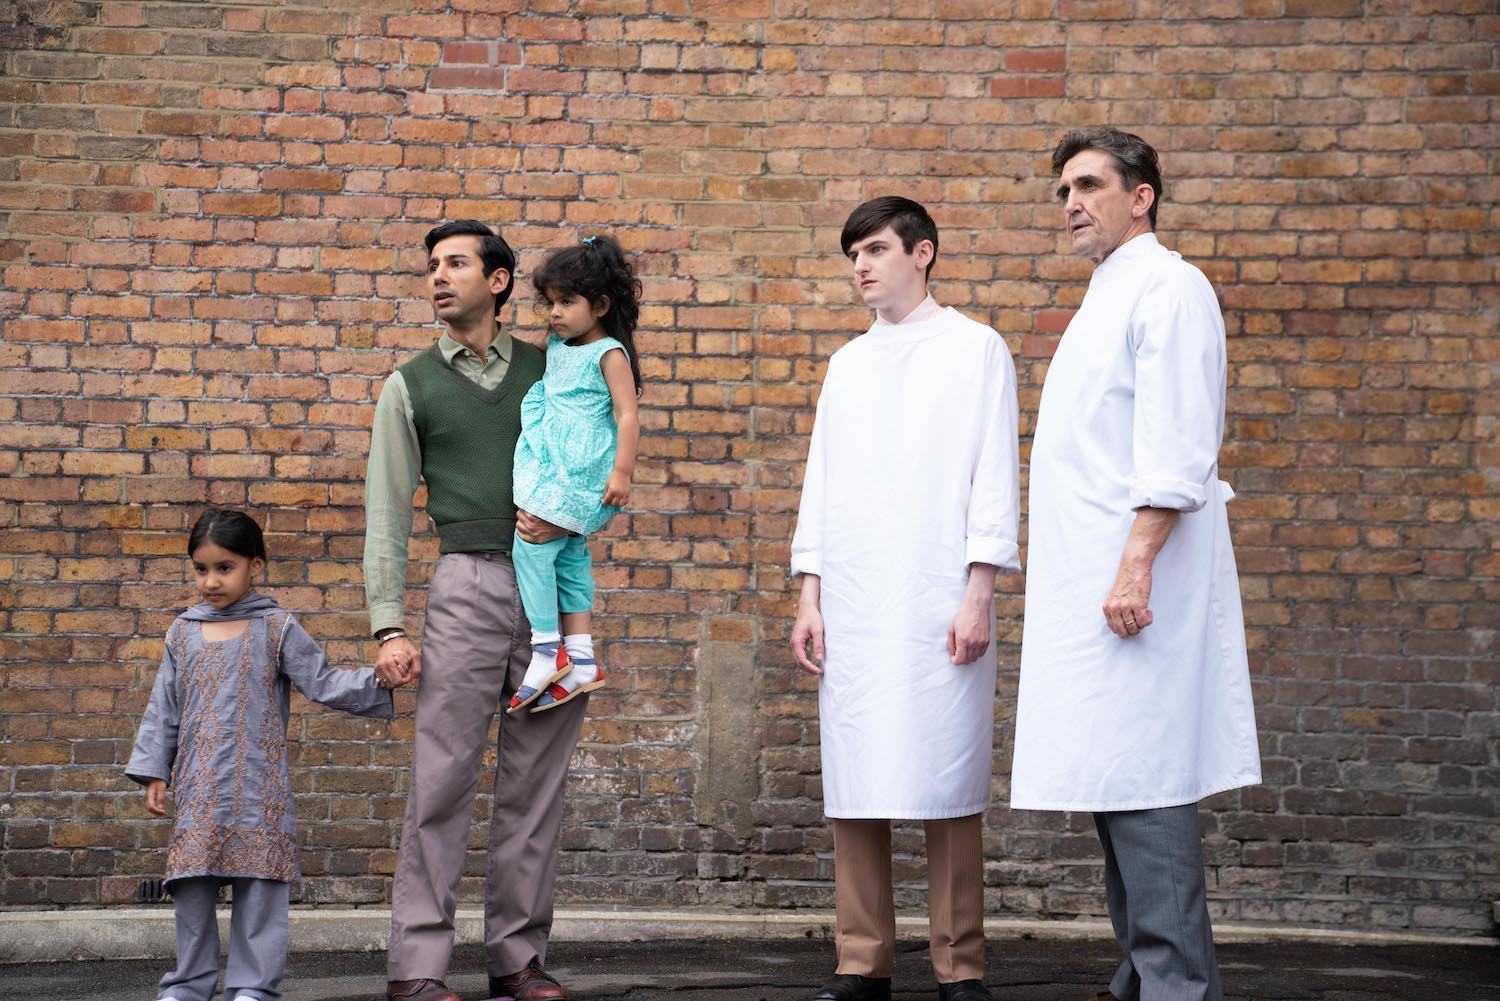 Picture shows: Standing outside against a brick wall, Dr. Turner (Stephen McGann), Tim (Max McMillan),and Romesh (Manish Gandhi) watches the ambulance leave for the hospital, with his critically sick daughter aboard. He holds the hands of his two elder daughters.